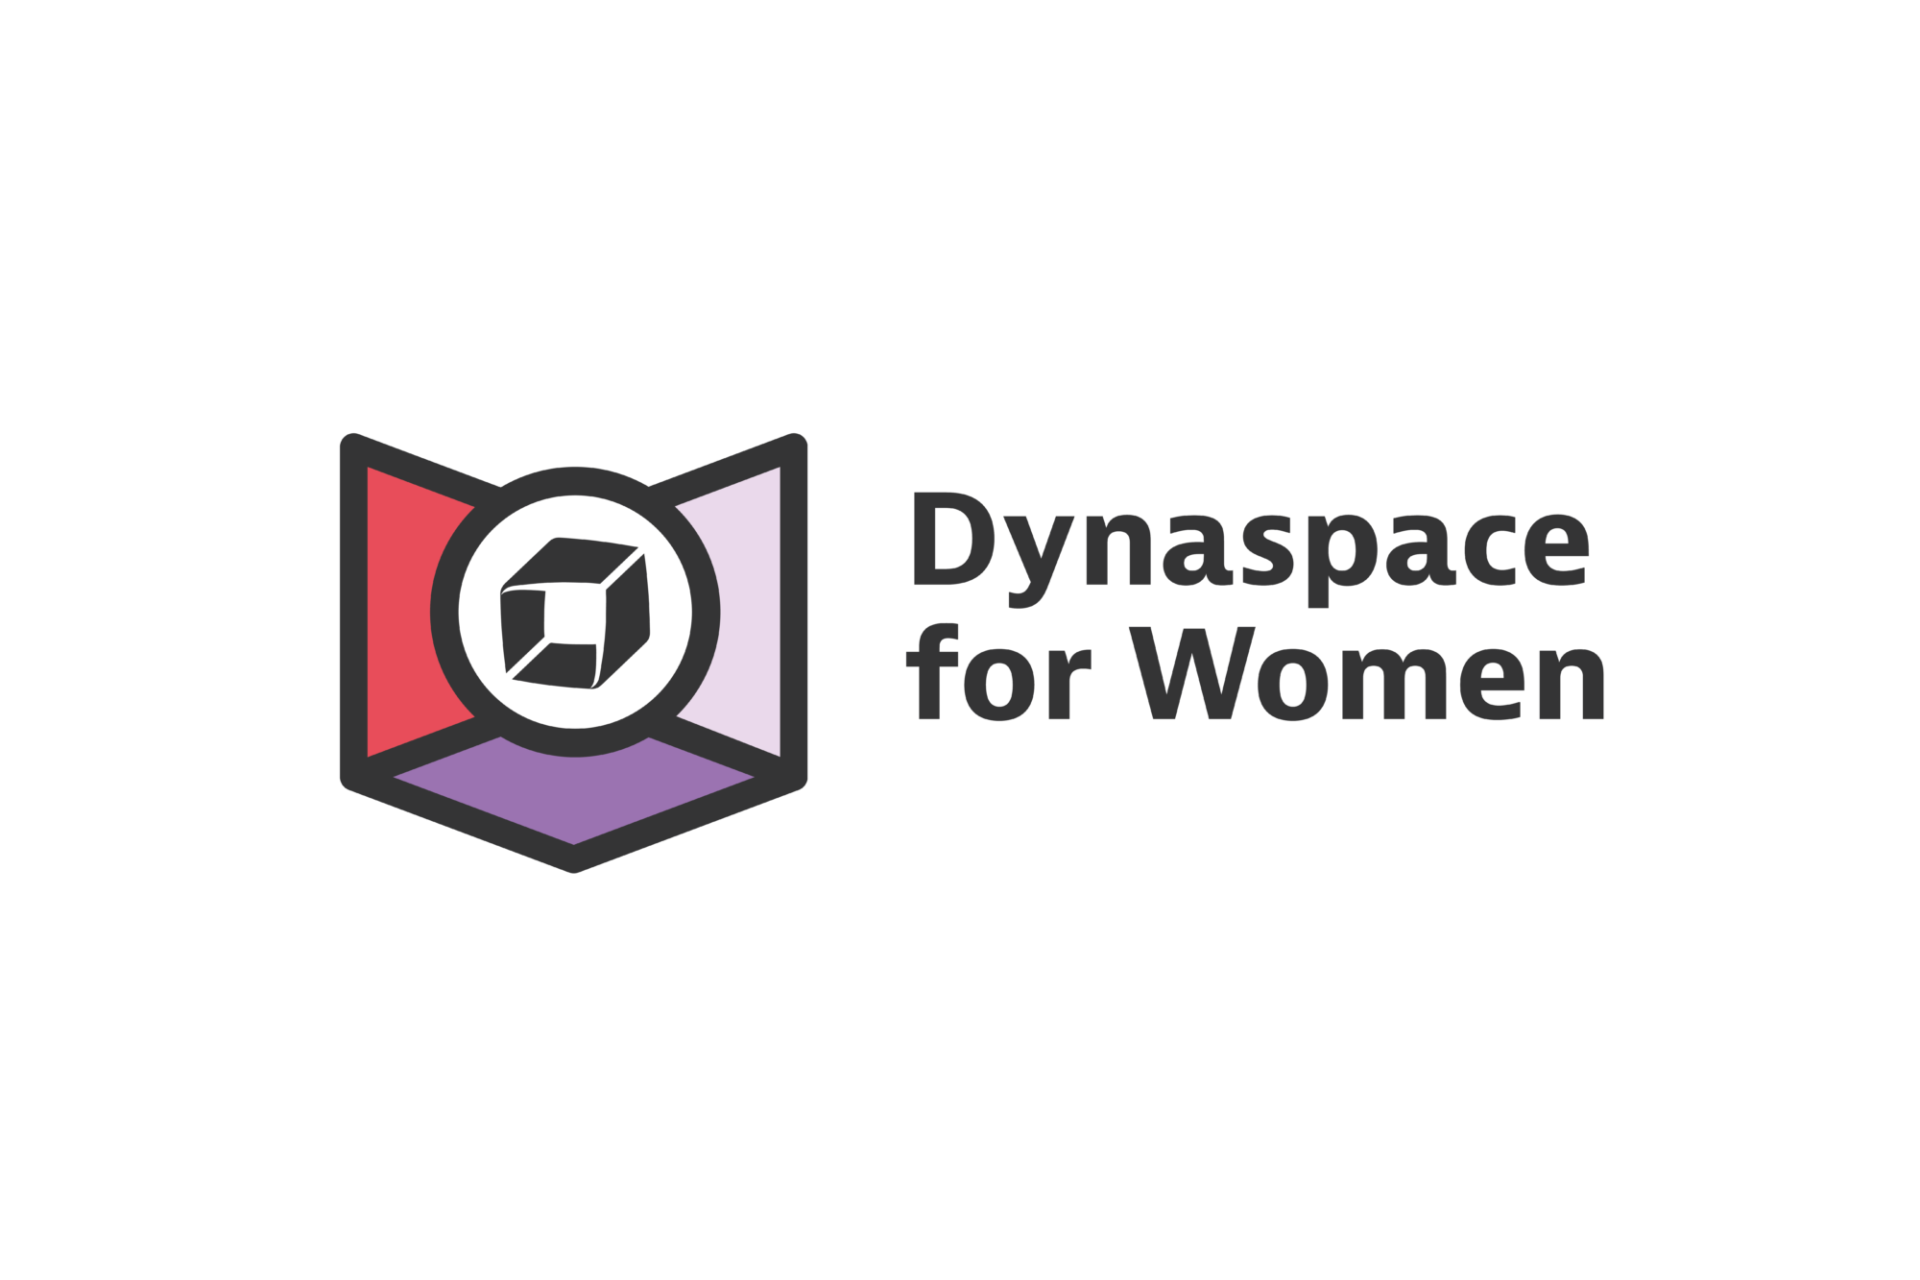 Dynaspace for Women